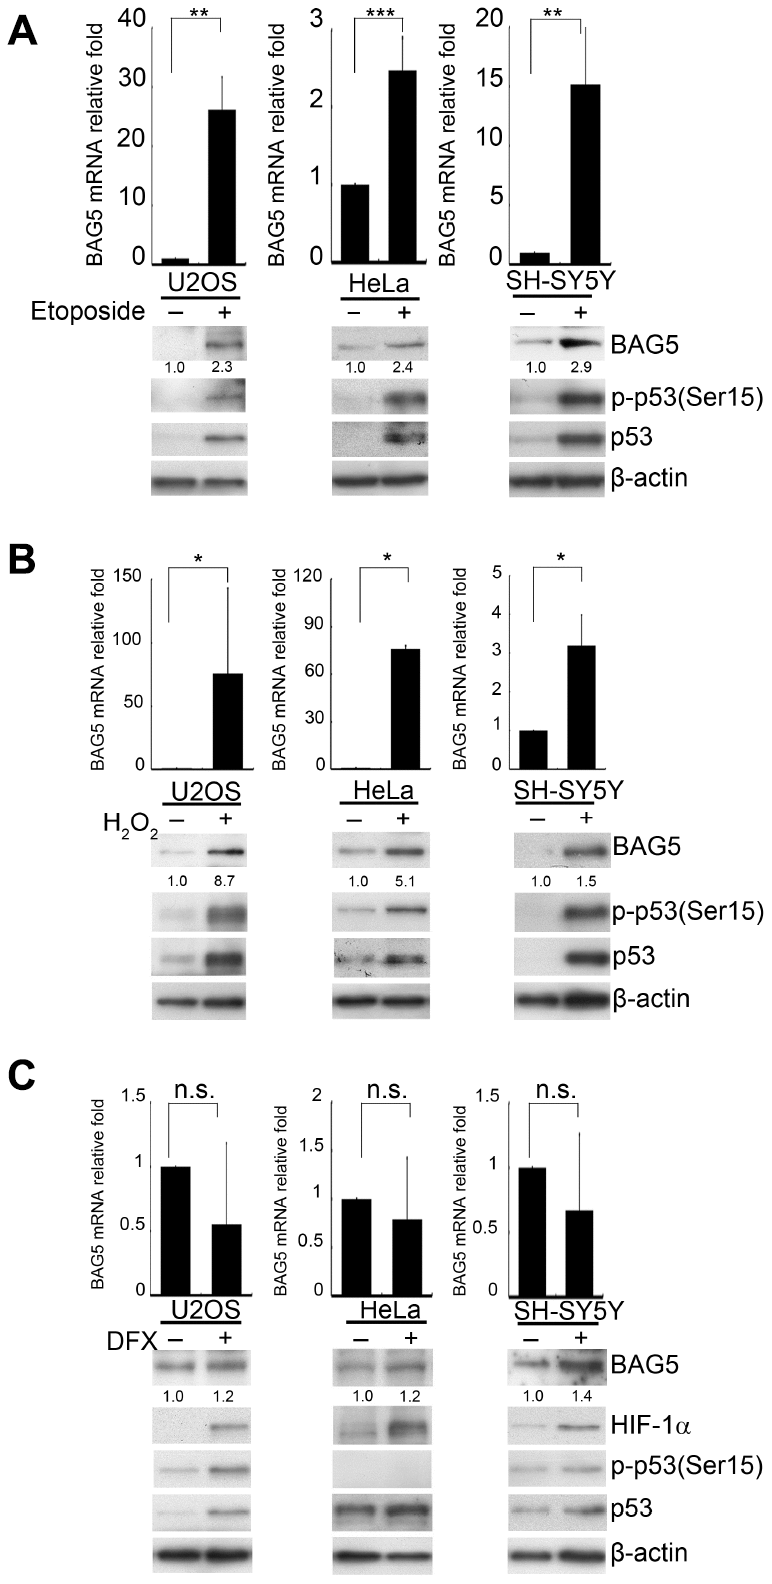 BAG5 is upregulated in DNA damage- and oxidative stress-treated cells but not in hypoxia-treated cells. (A–C) U2OS, HeLa, and SH-SY5Y cells were treated with 10 μM of etoposide for 48 h, 250 μM of H2O2 for 24 h, 10 μM of DFX for 48 h, or solvent. RNA was extracted, and BAG5 transcripts were detected by RT-Q-PCR. The relative fold in BAG5 mRNA expression was normalized to the GAPDH control and the solvent control (upper panel). The protein expression of BAG5, p53, HIF-1α, and β-actin was detected by Western blotting (lower panel). The relative fold in protein expression was normalized to that of the internal control β-actin and standardized with the solvent control. Error bars represent the SD of the means calculated using data from three independent experiments (Student’s t-test; *, p **, p ***, p 